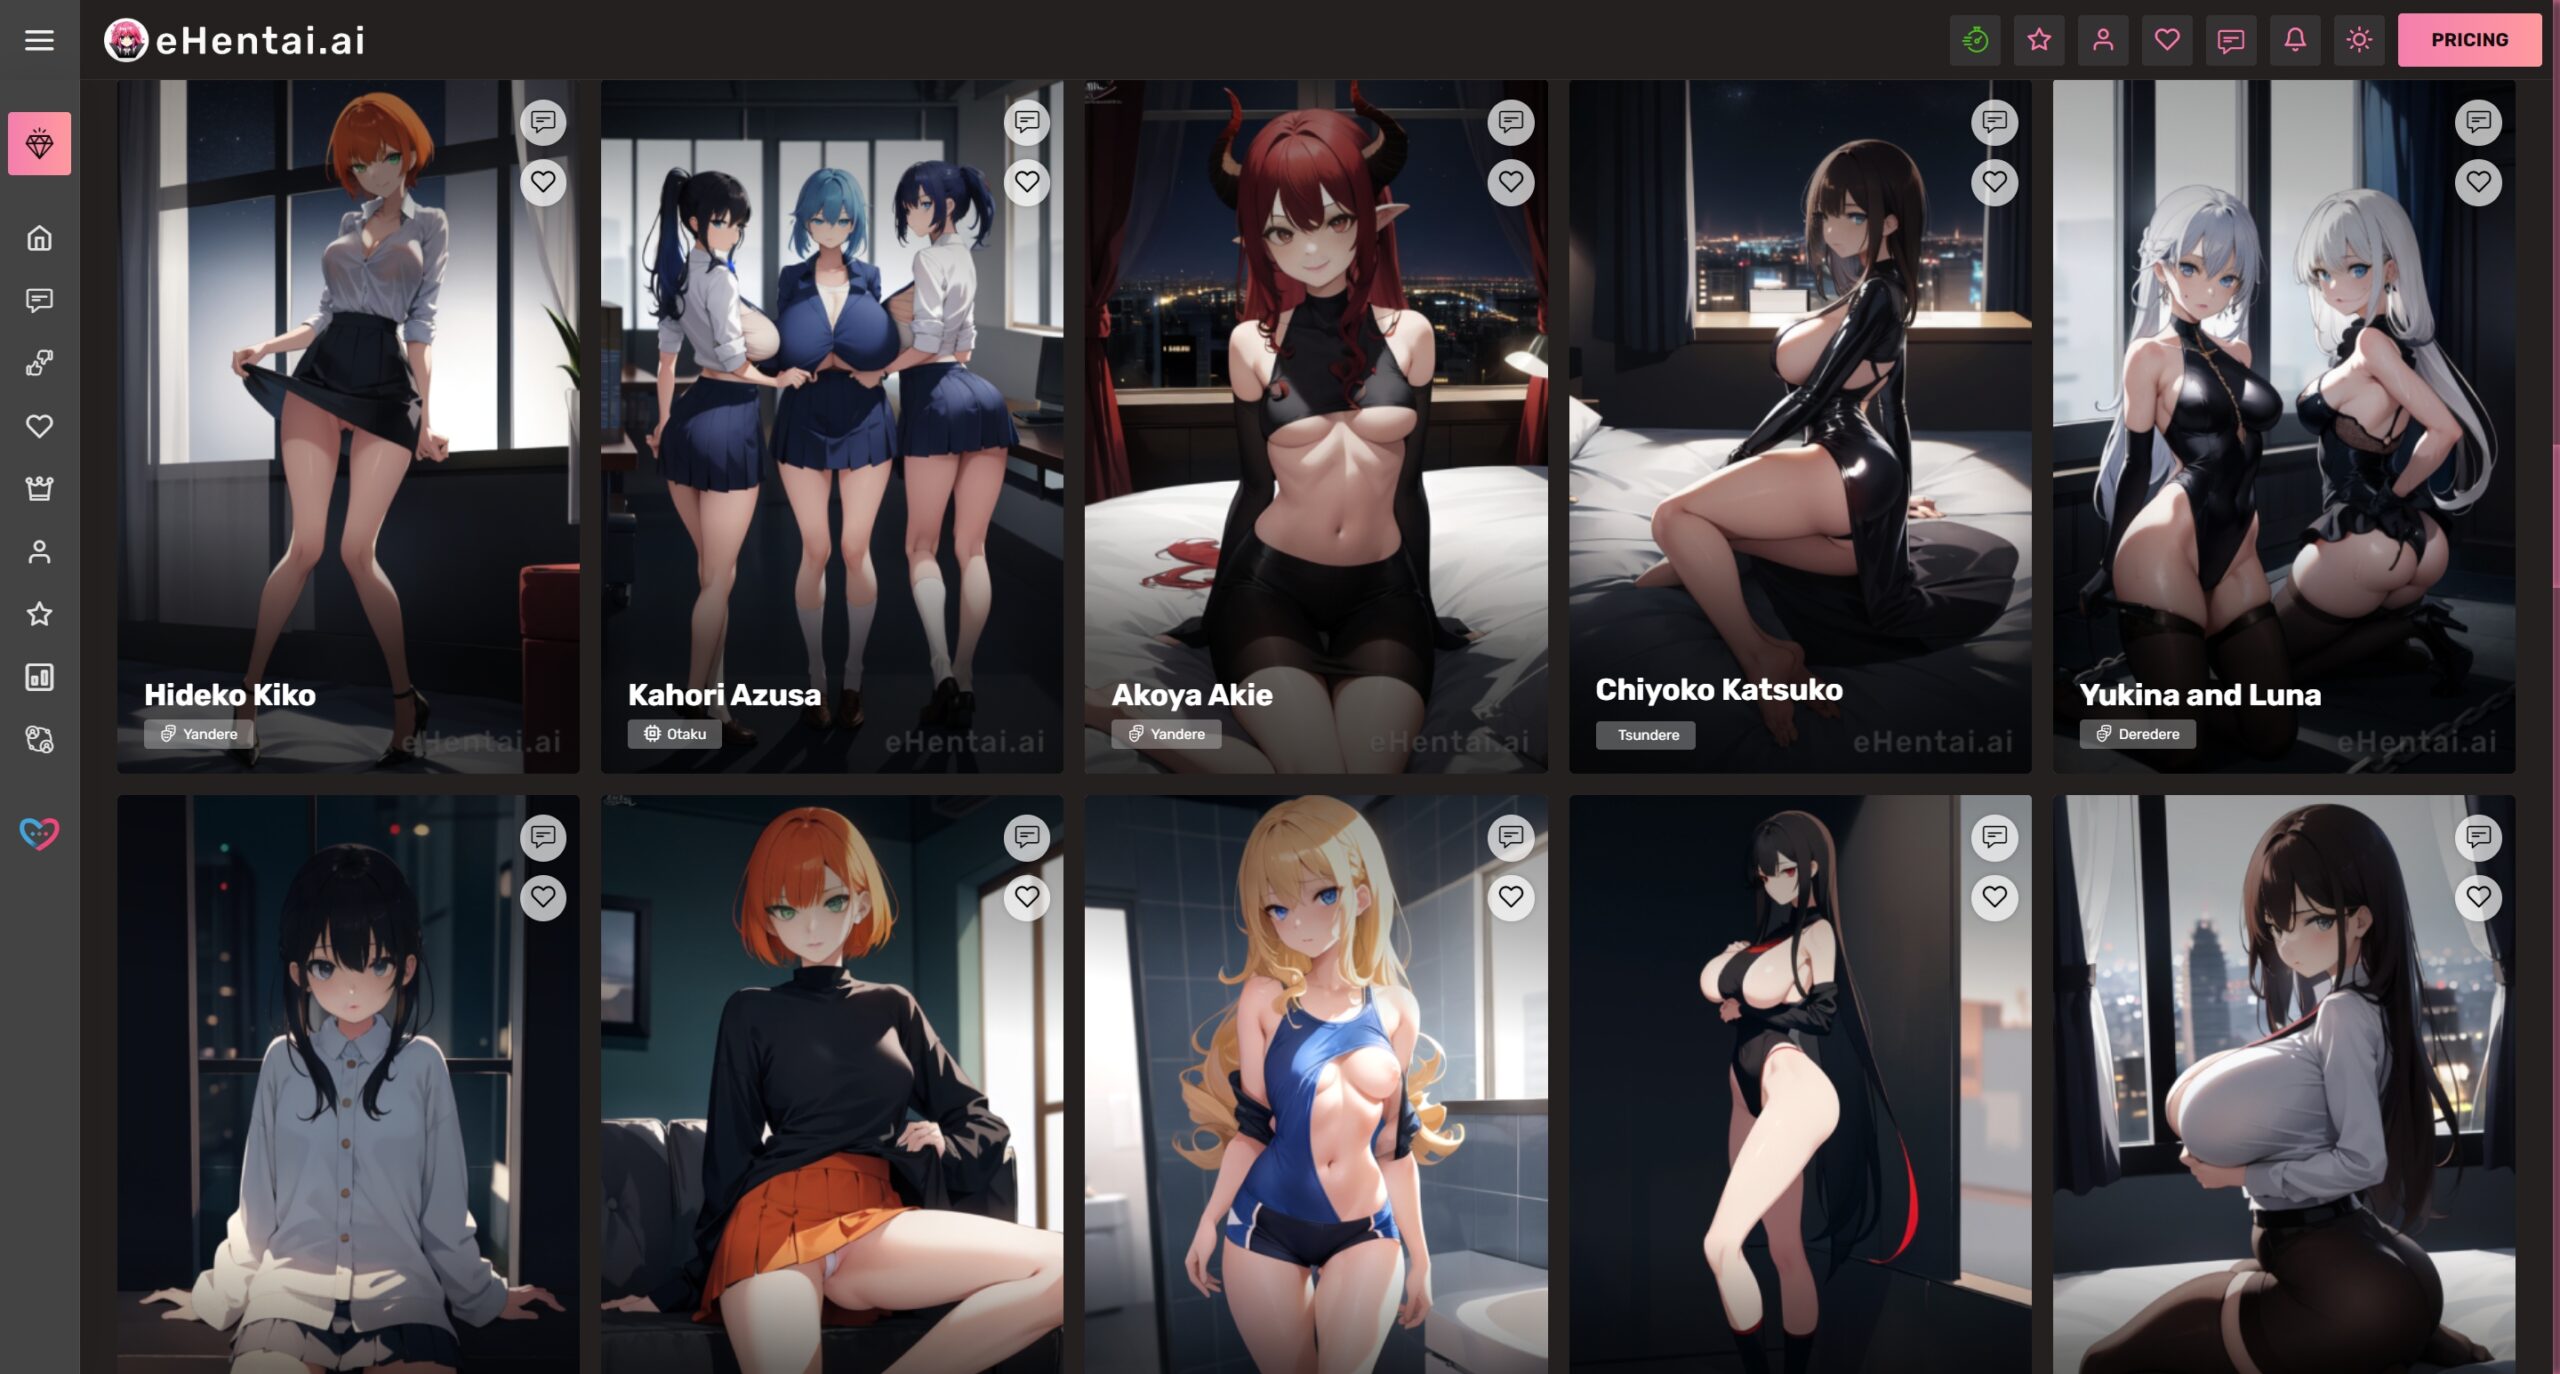 ehentai ai Full Review: Best Hentai AI sex chat for you?